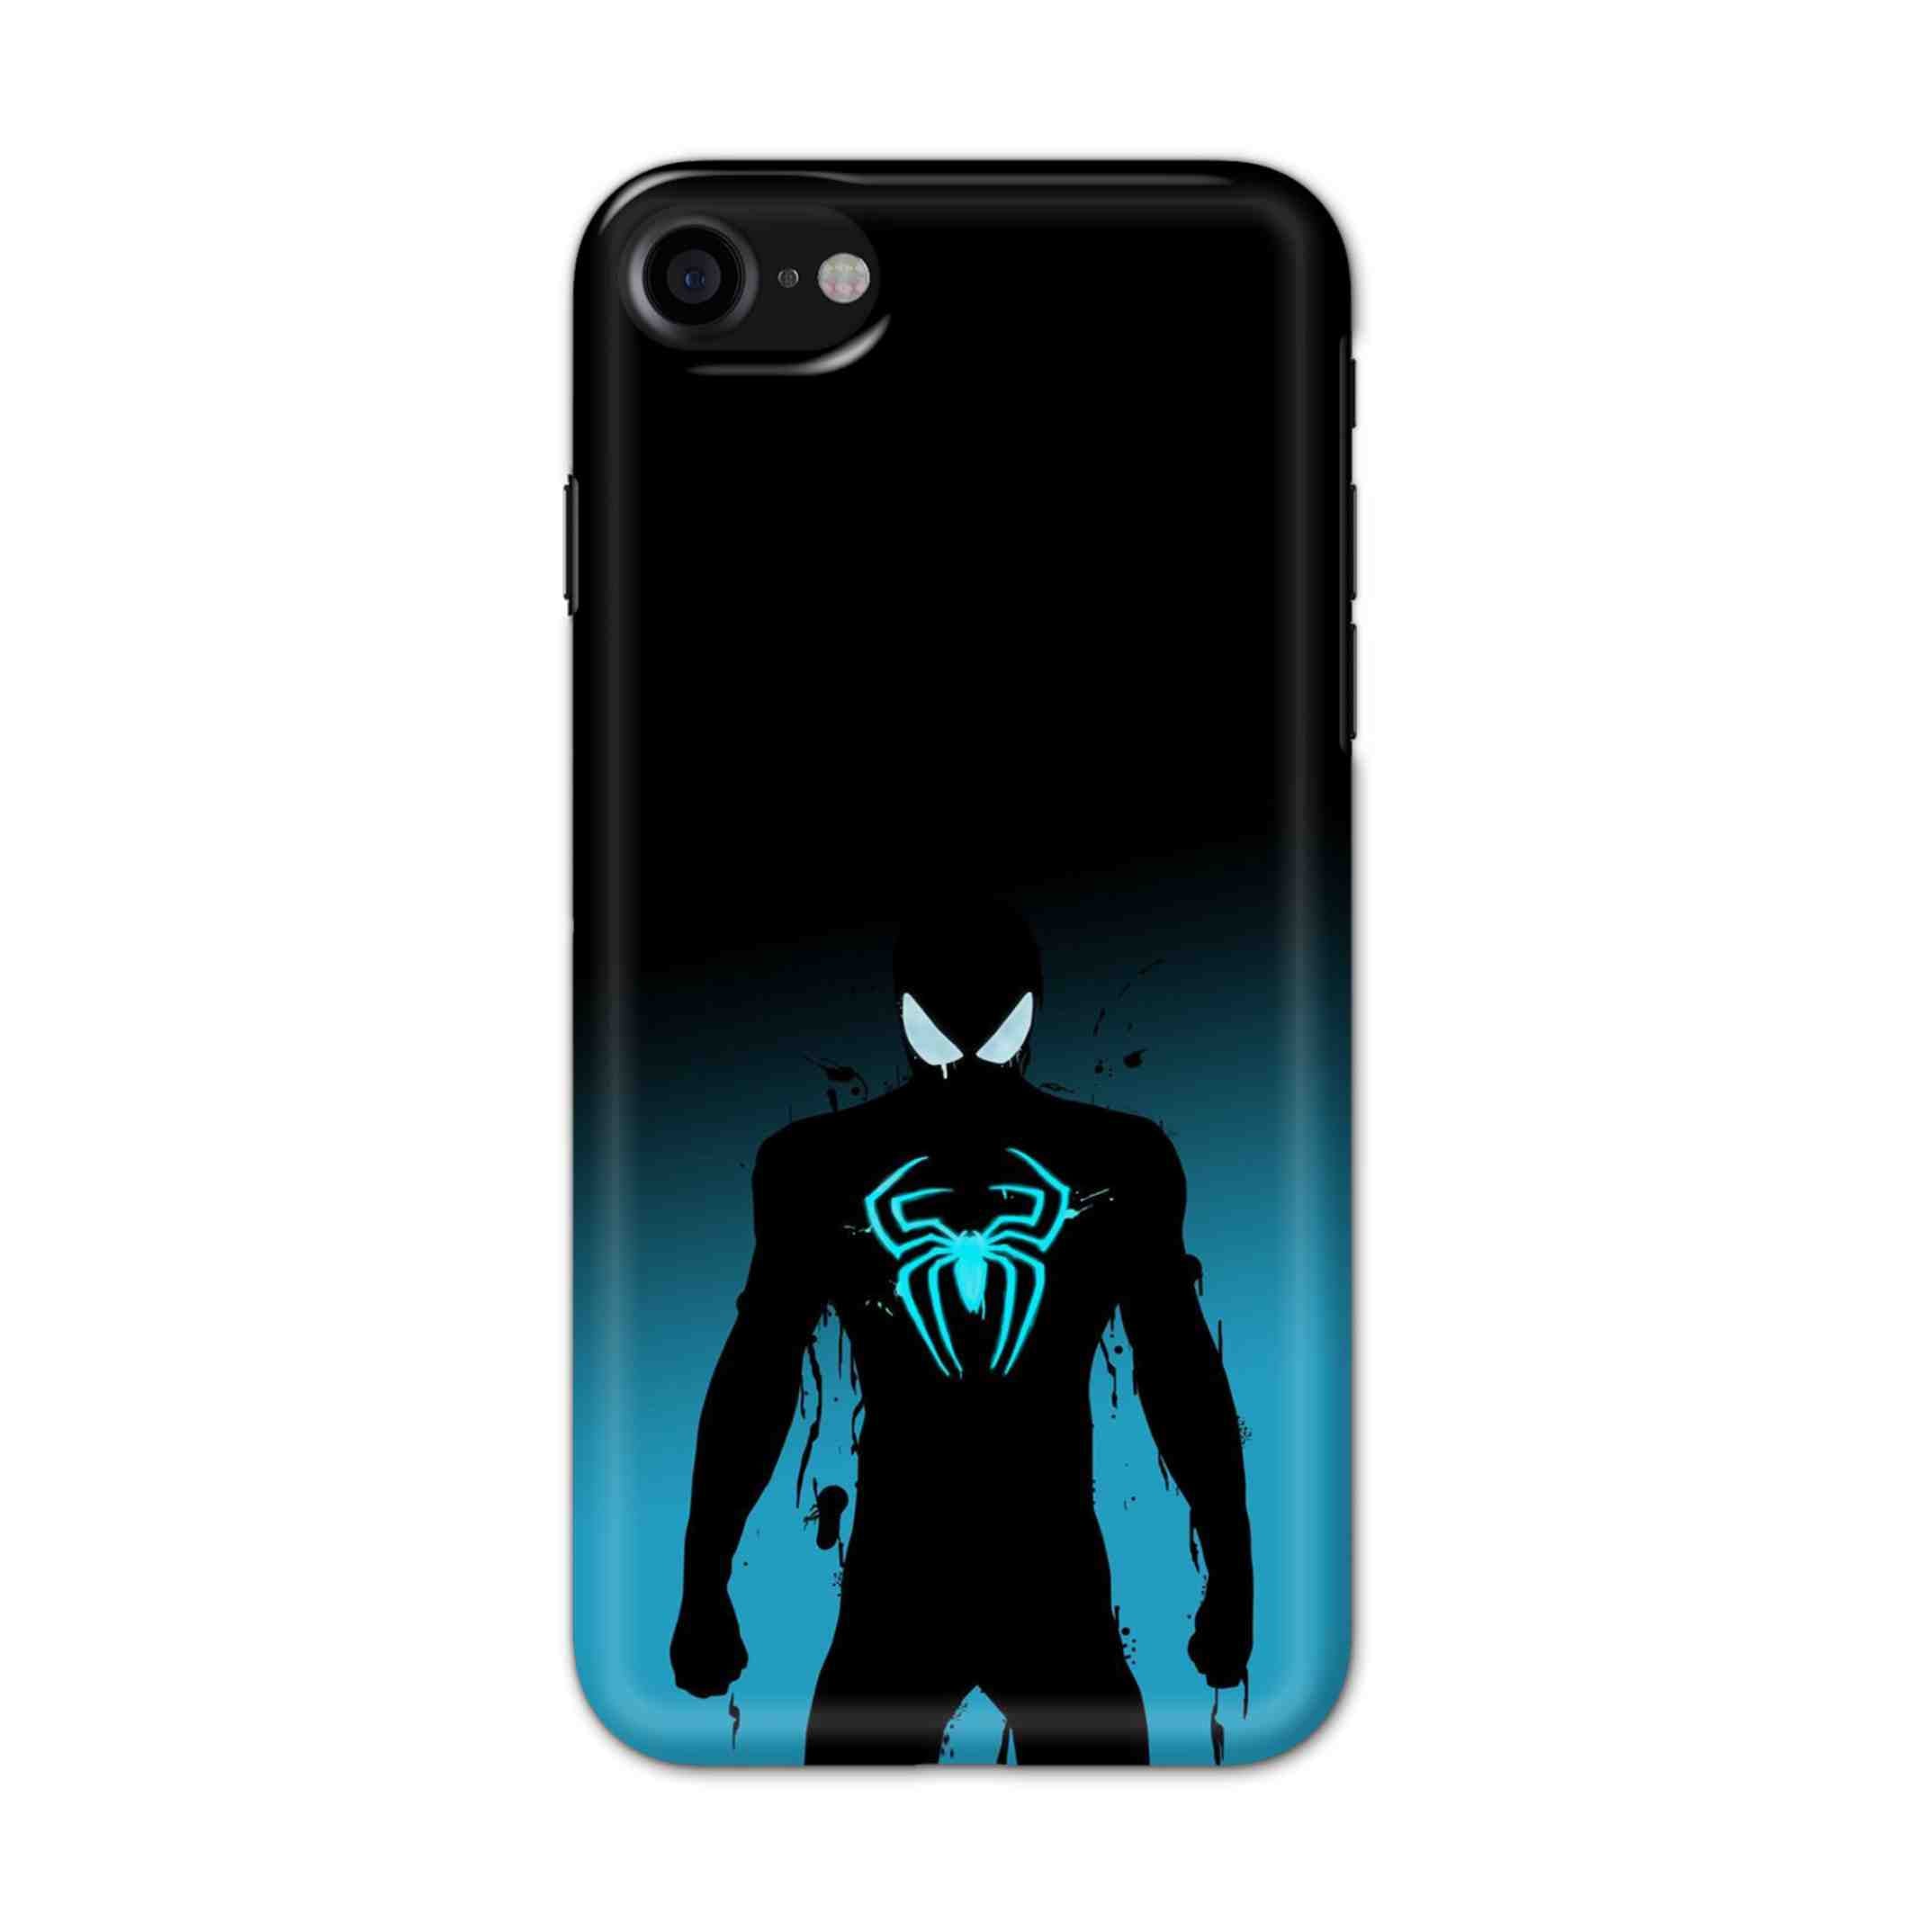 Buy Neon Spiderman Hard Back Mobile Phone Case/Cover For iPhone 7 / 8 Online